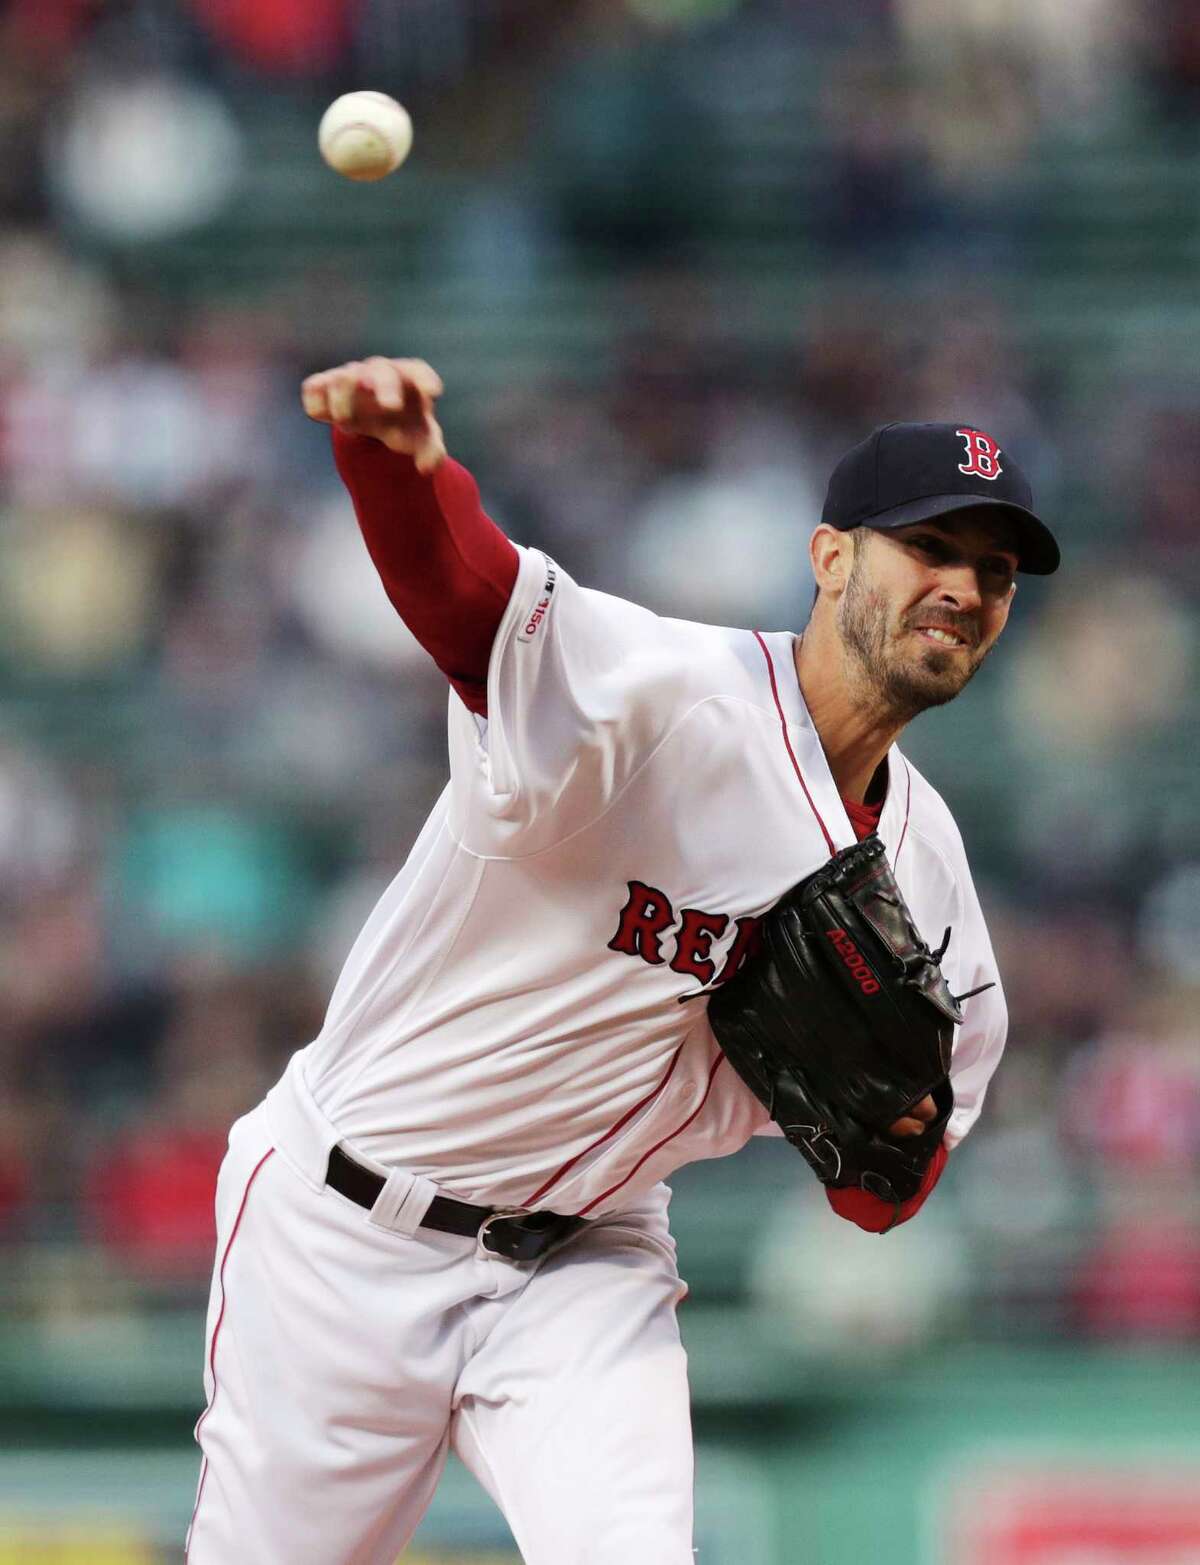 Boston Red Sox starting pitcher Rick Porcello delivers during the first inning of a baseball game against the Oakland Athletics at Fenway Park, Tuesday, April 30, 2019, in Boston. (AP Photo/Charles Krupa)